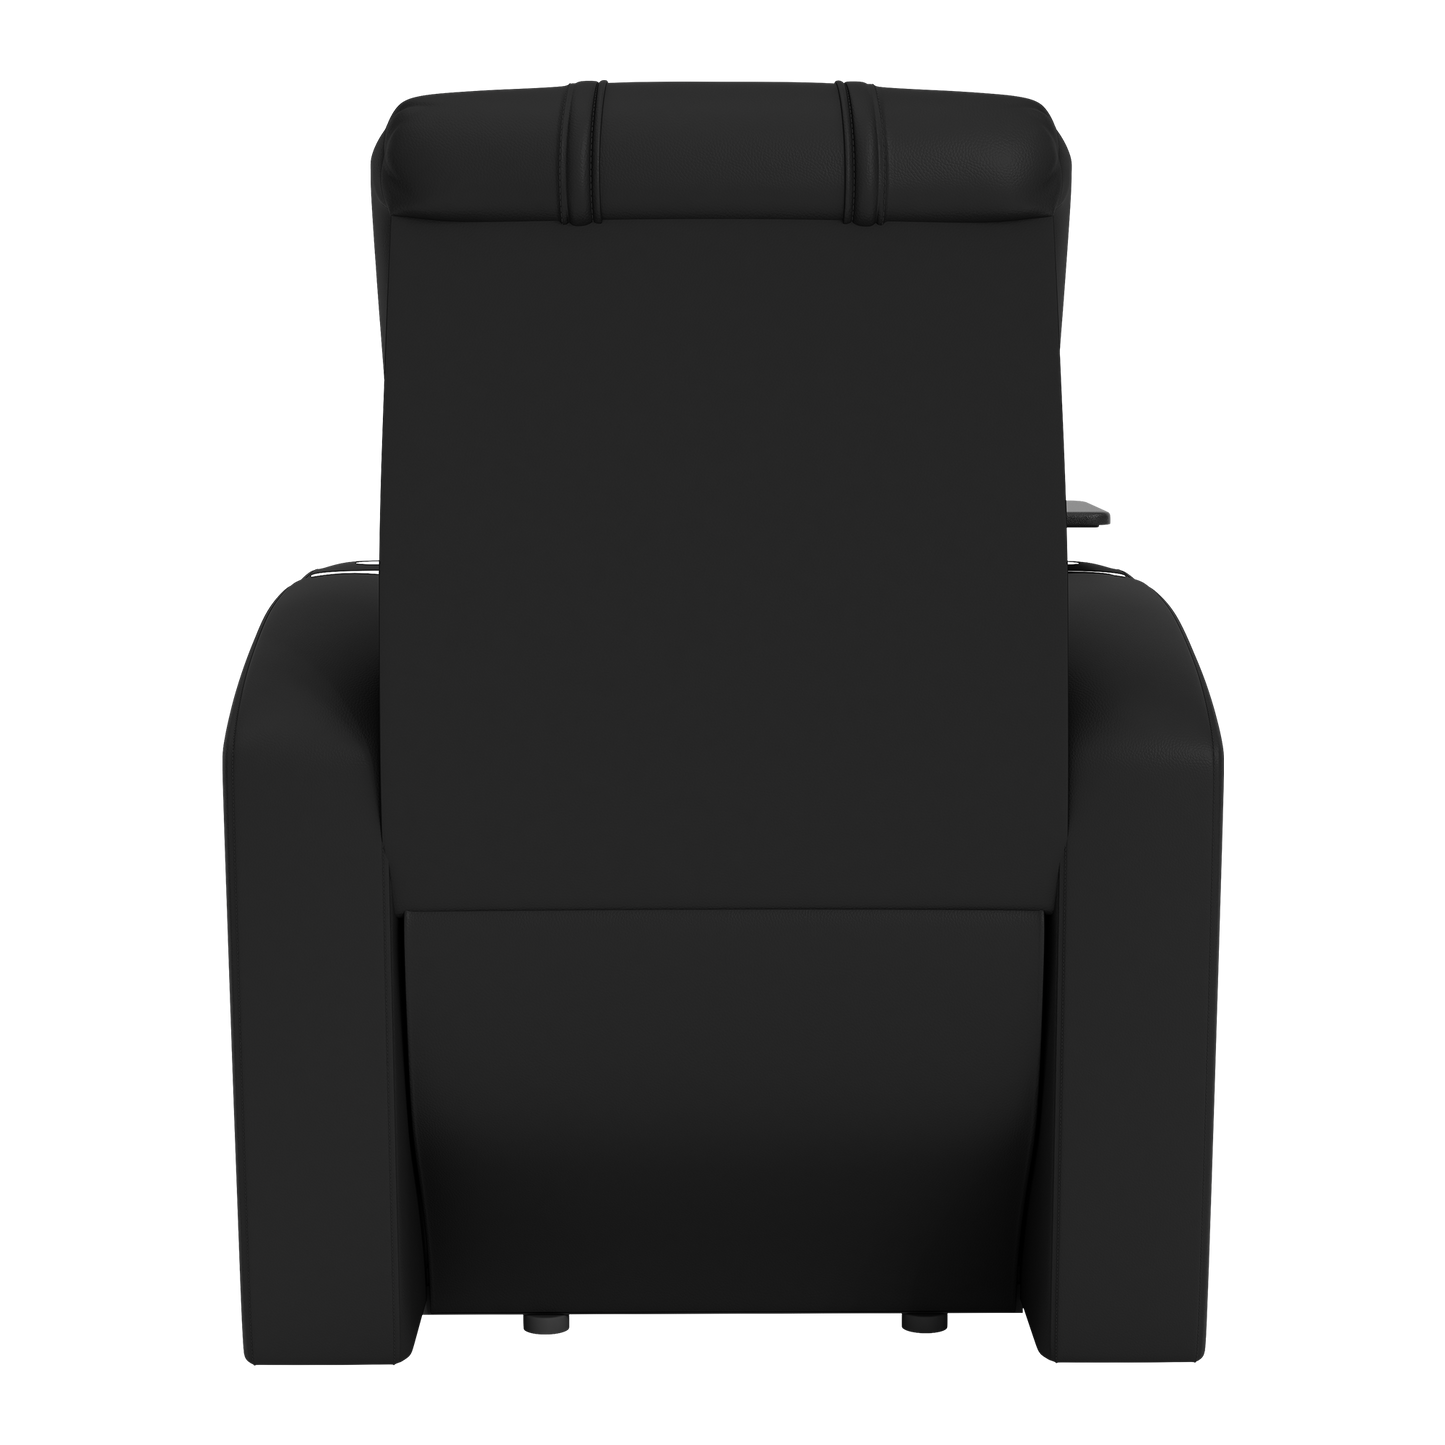 Stealth Power Plus Recliner with Seattle Seahawks Secondary Logo